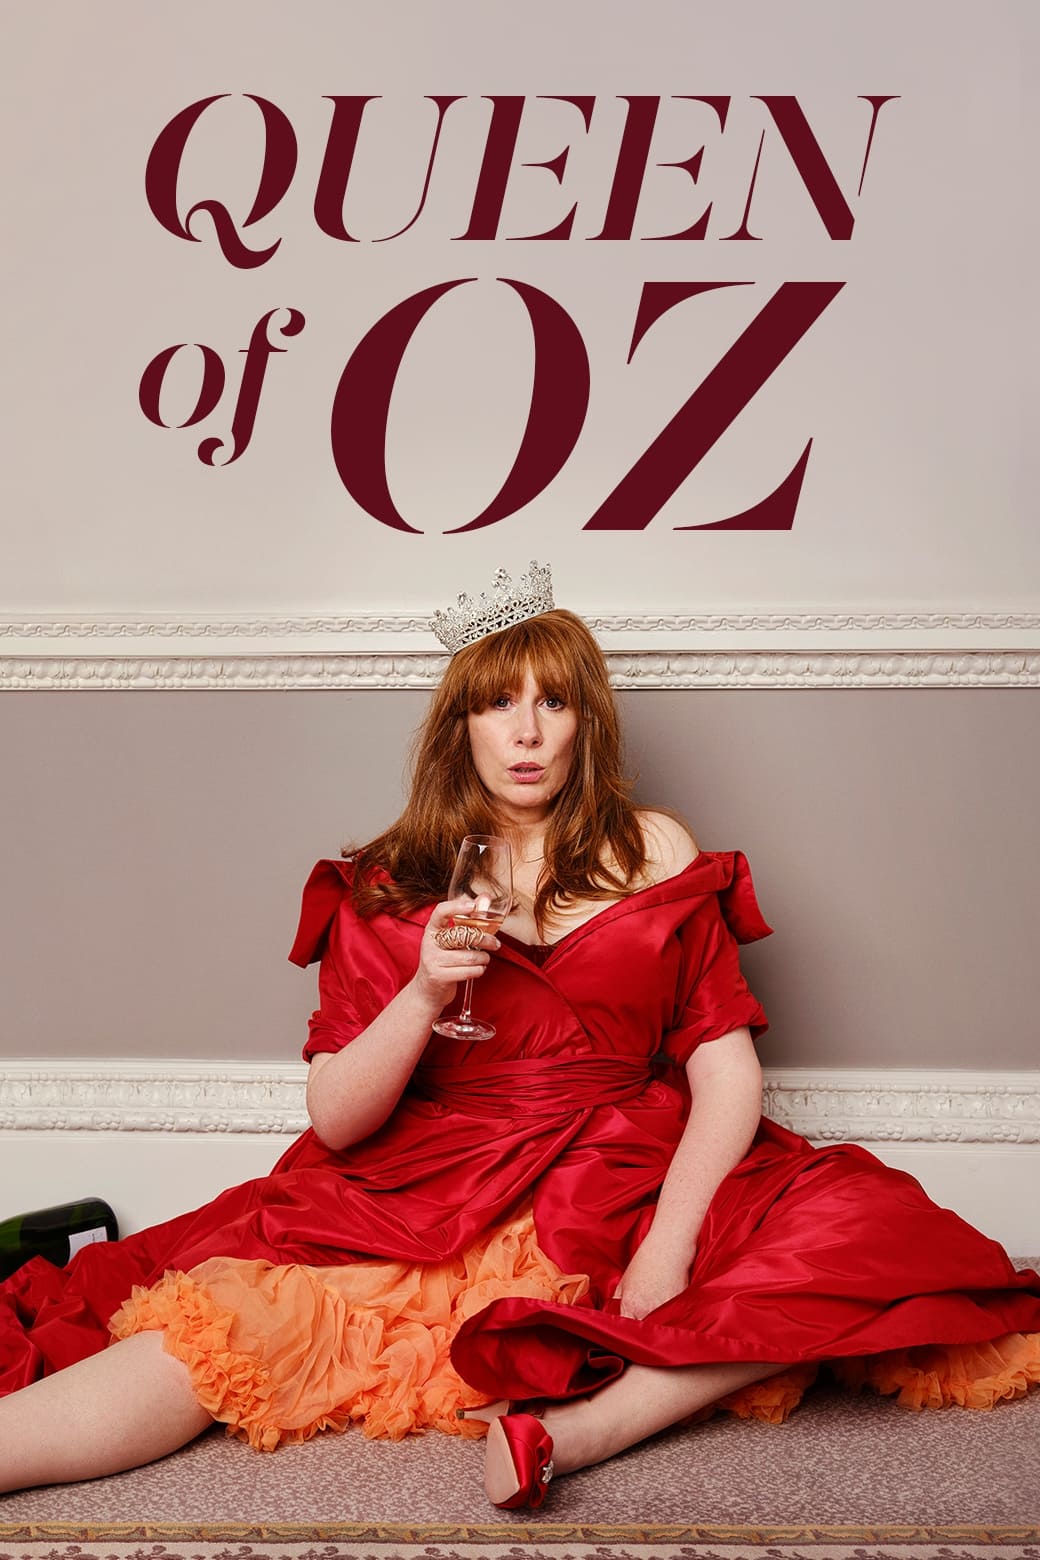 Queen of Oz TV Shows About Politics